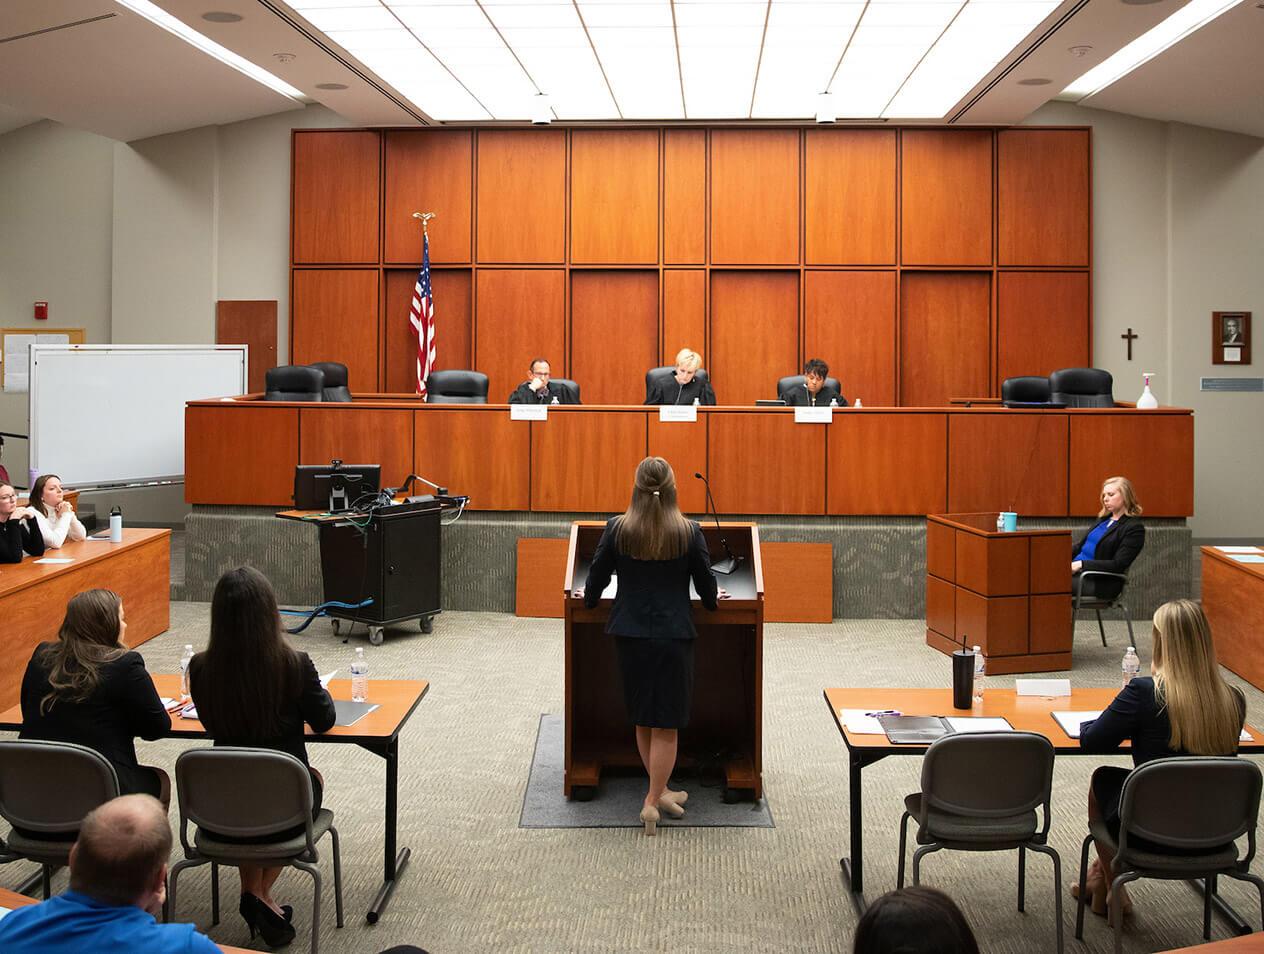 Law students participating in the law school's moot court exercise